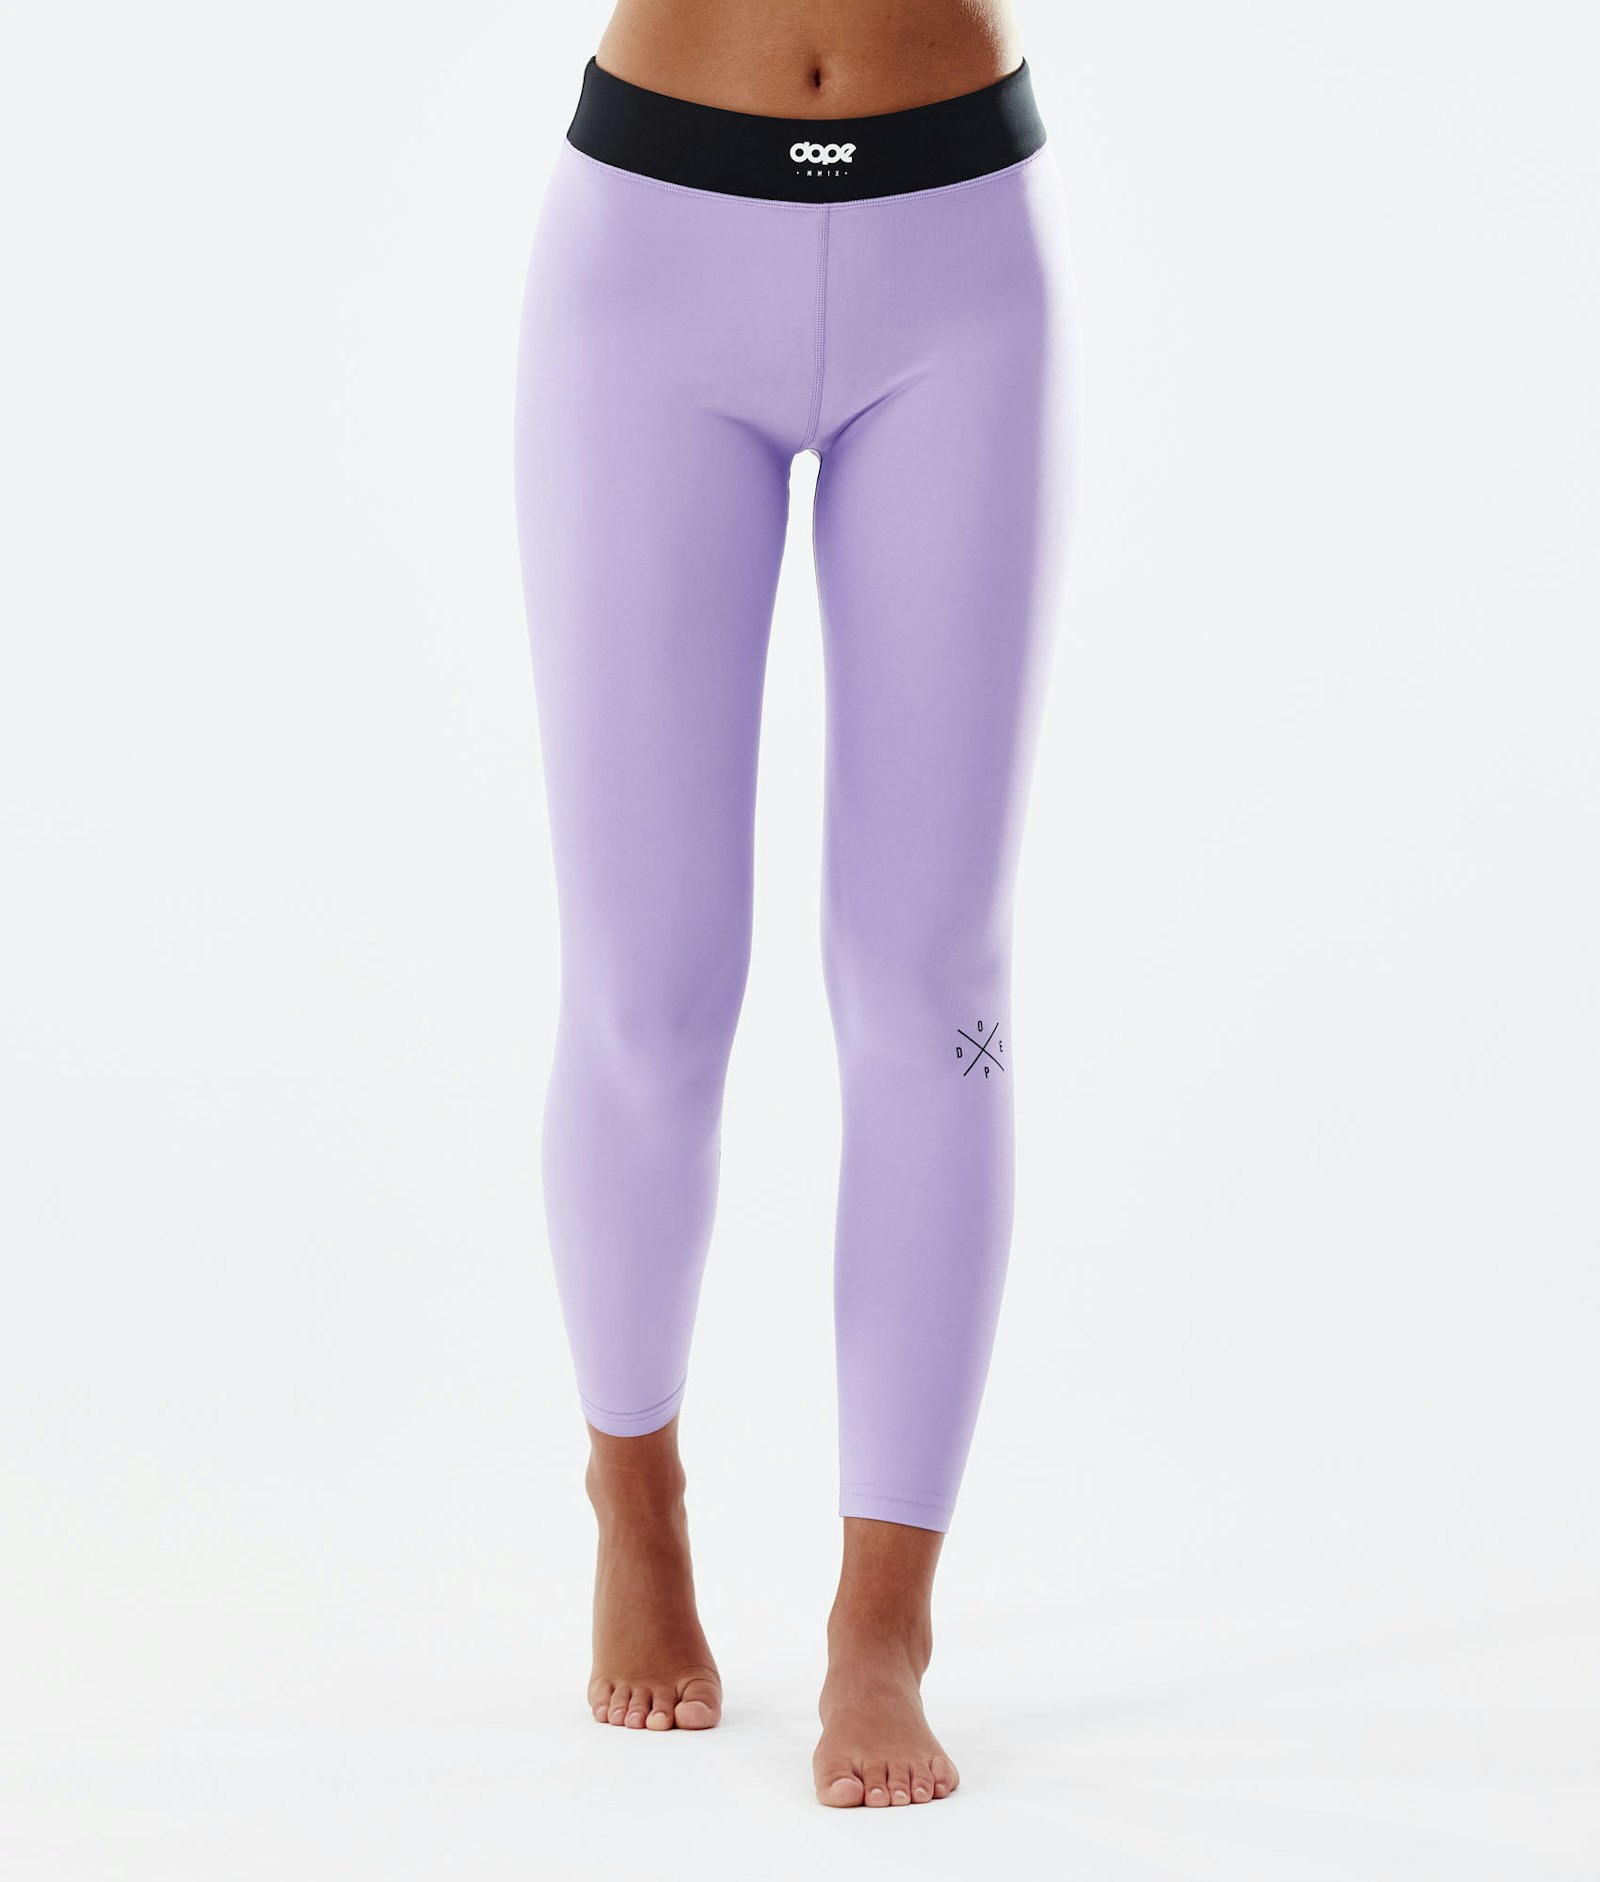 Snuggle W 2021 Base Layer Pant Women 2X-Up Faded Violet